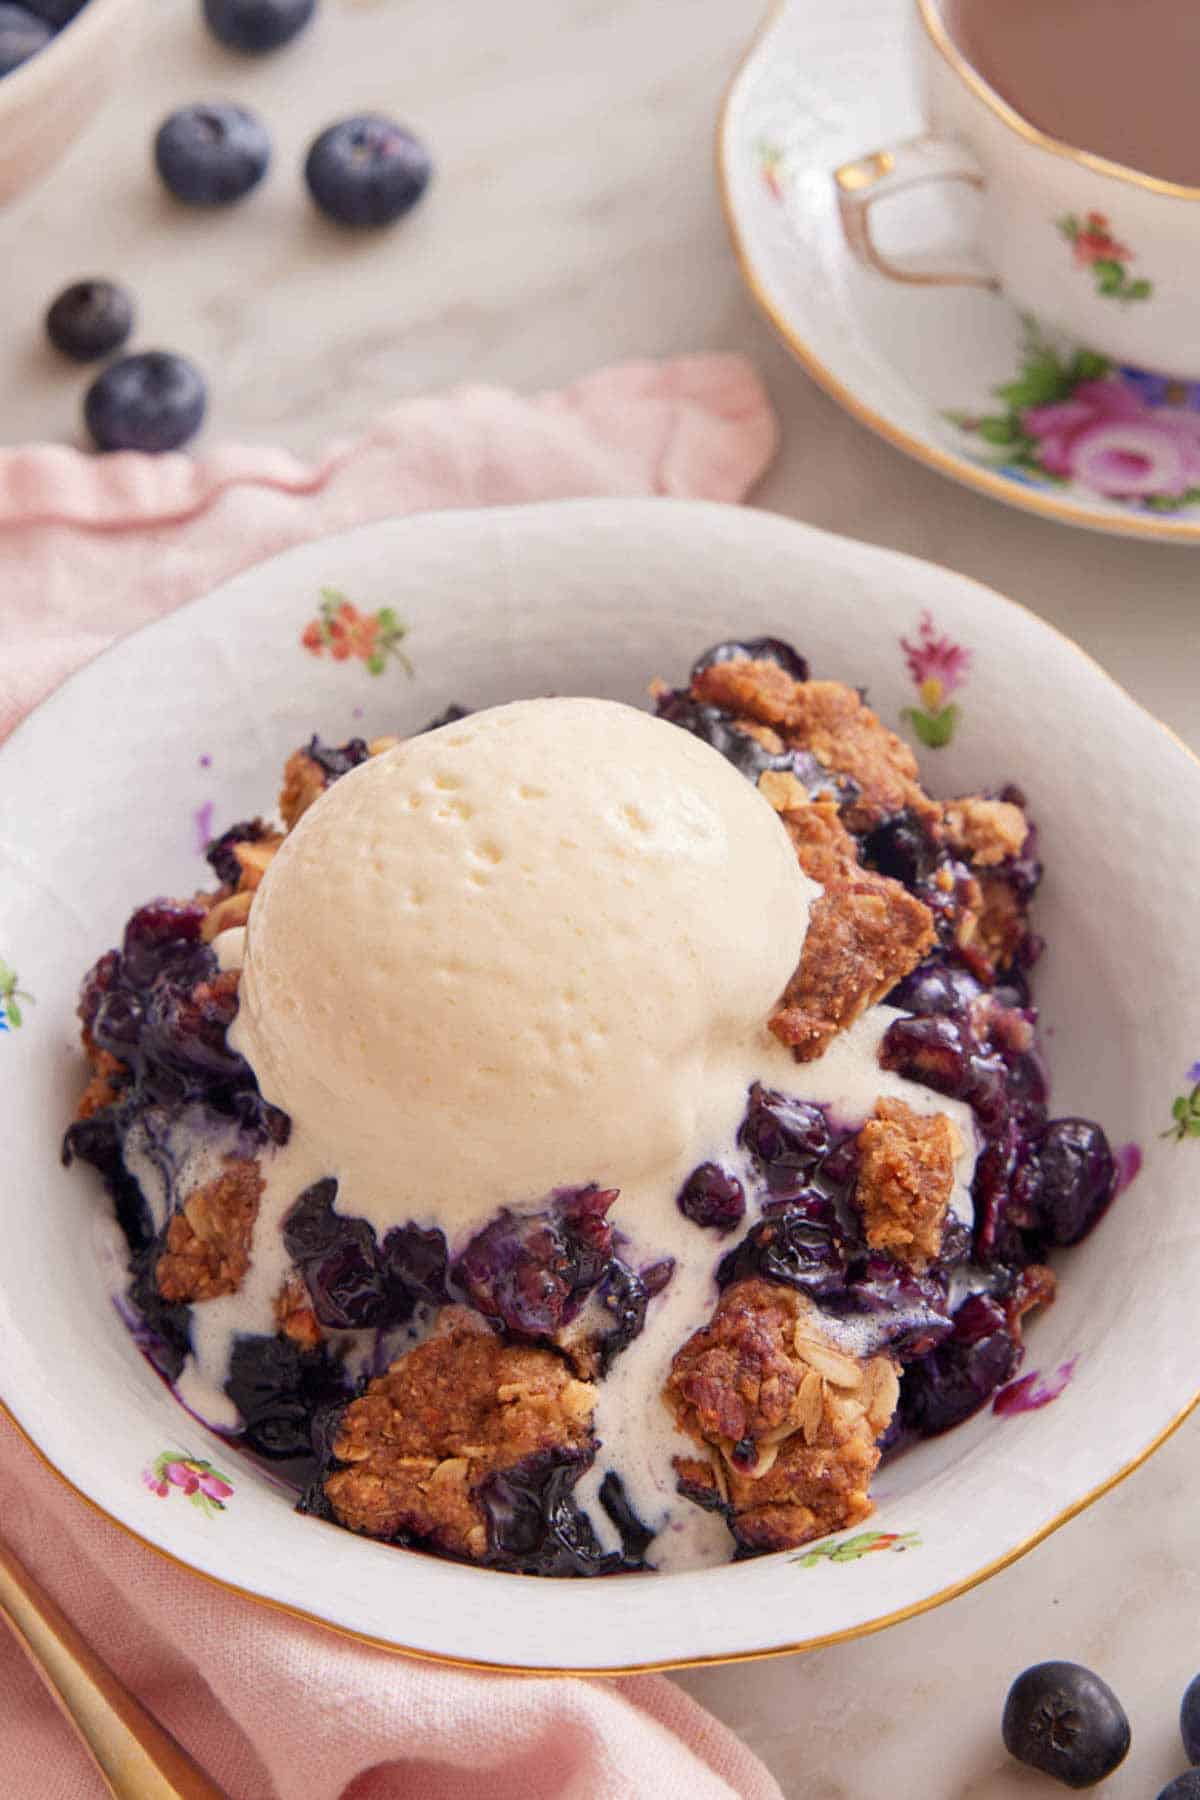 A plate with blueberry crisp with a scoop of vanilla ice cream melting on top.